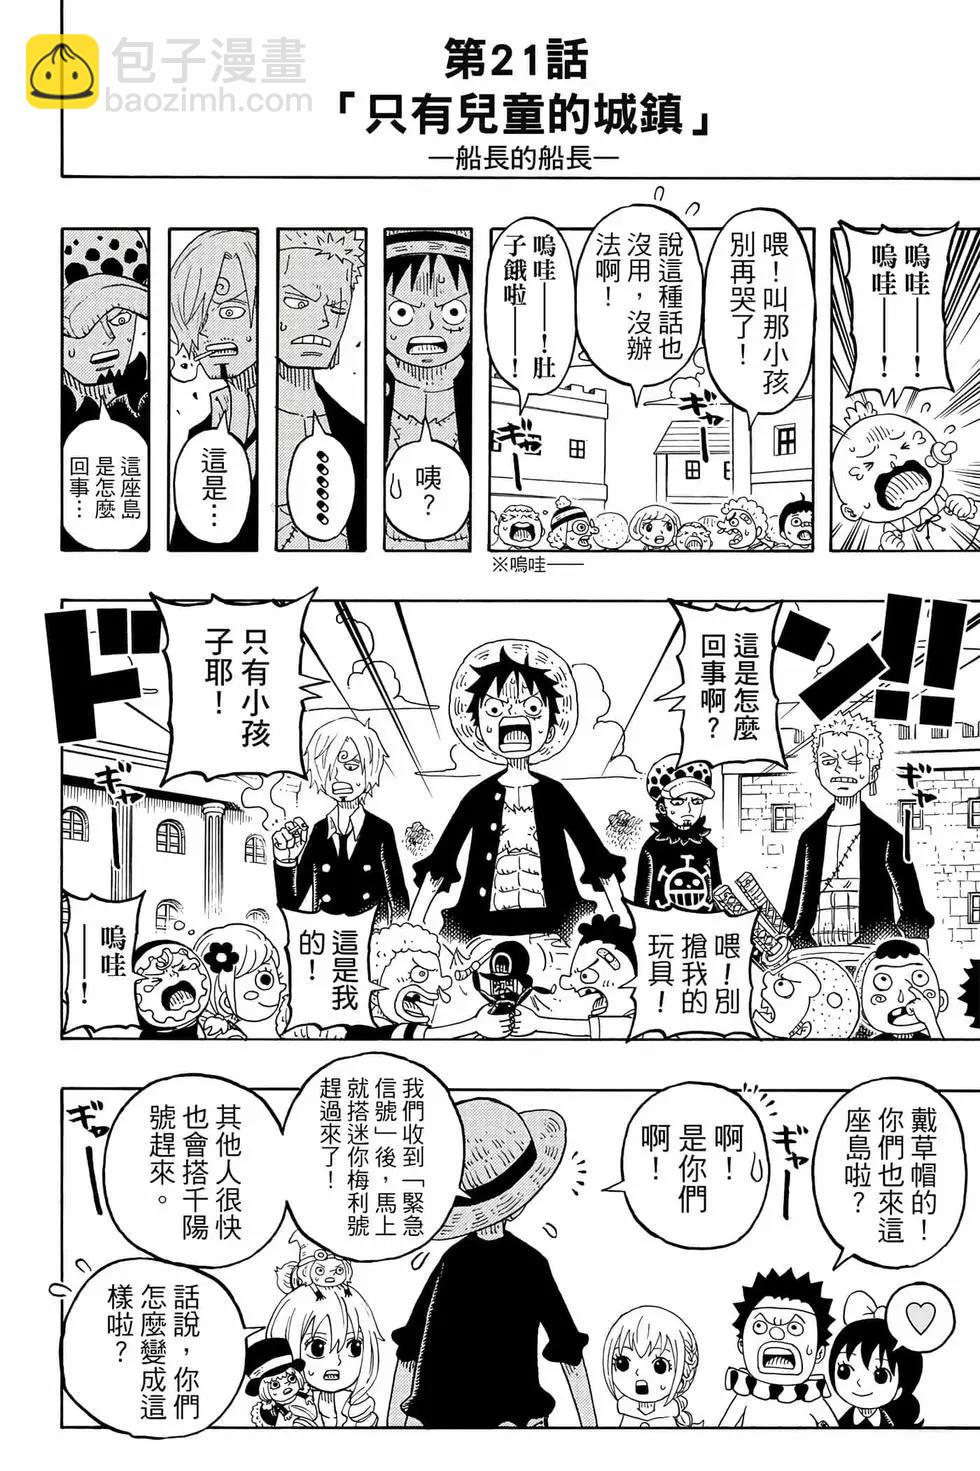 One piece party - 第05卷(1/4) - 1